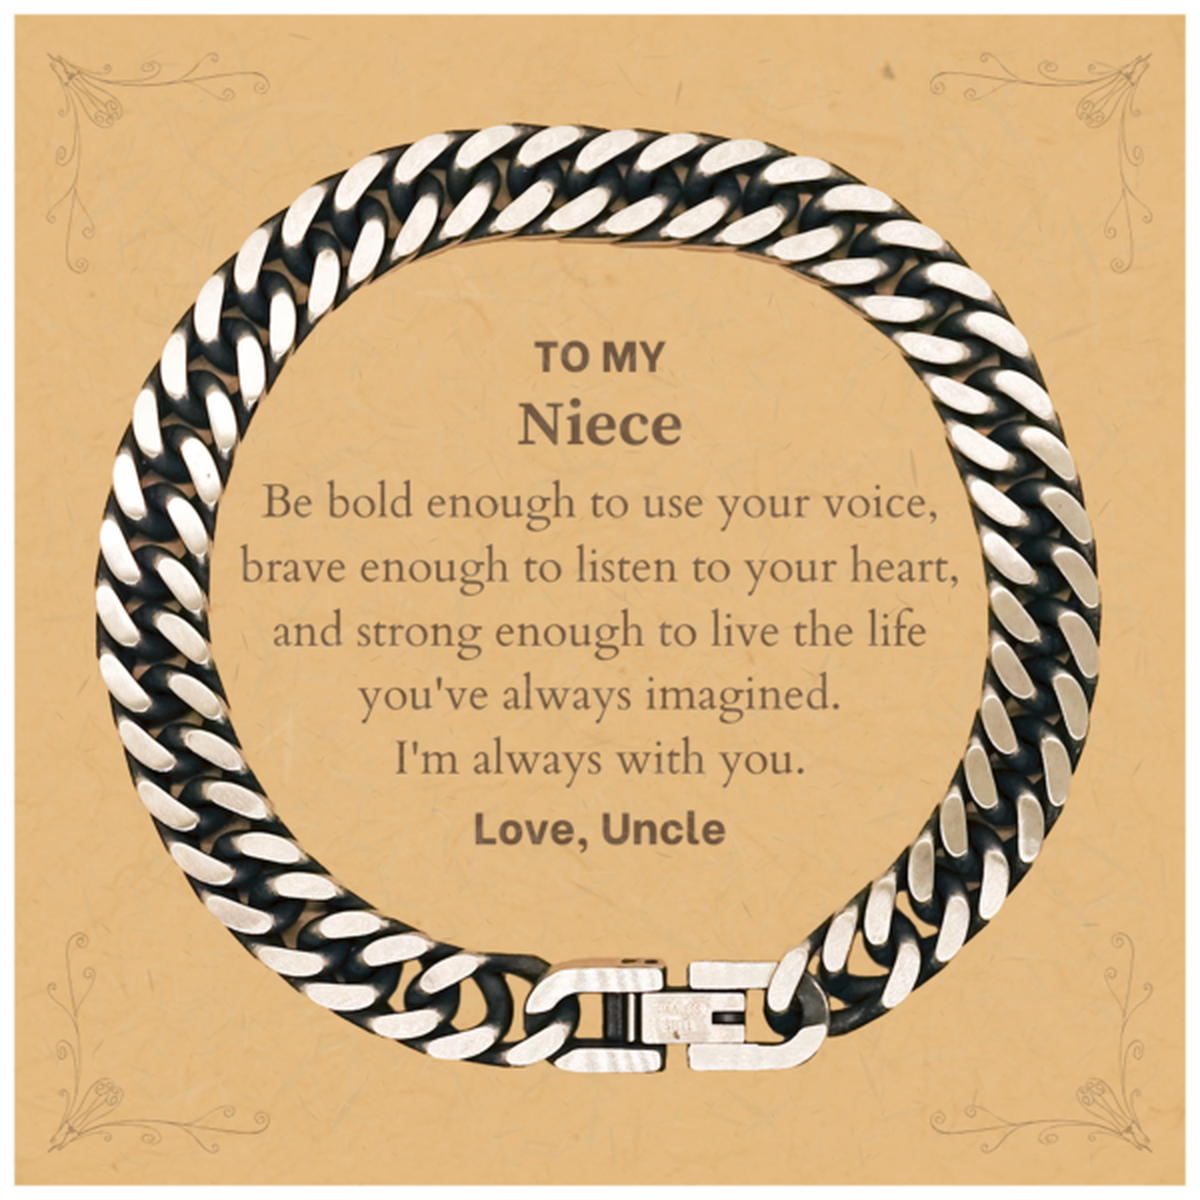 Keepsake Niece Cuban Link Chain Bracelet Gift Idea Graduation Christmas Birthday Niece from Uncle, Niece Be bold enough to use your voice, brave enough to listen to your heart. Love, Uncle